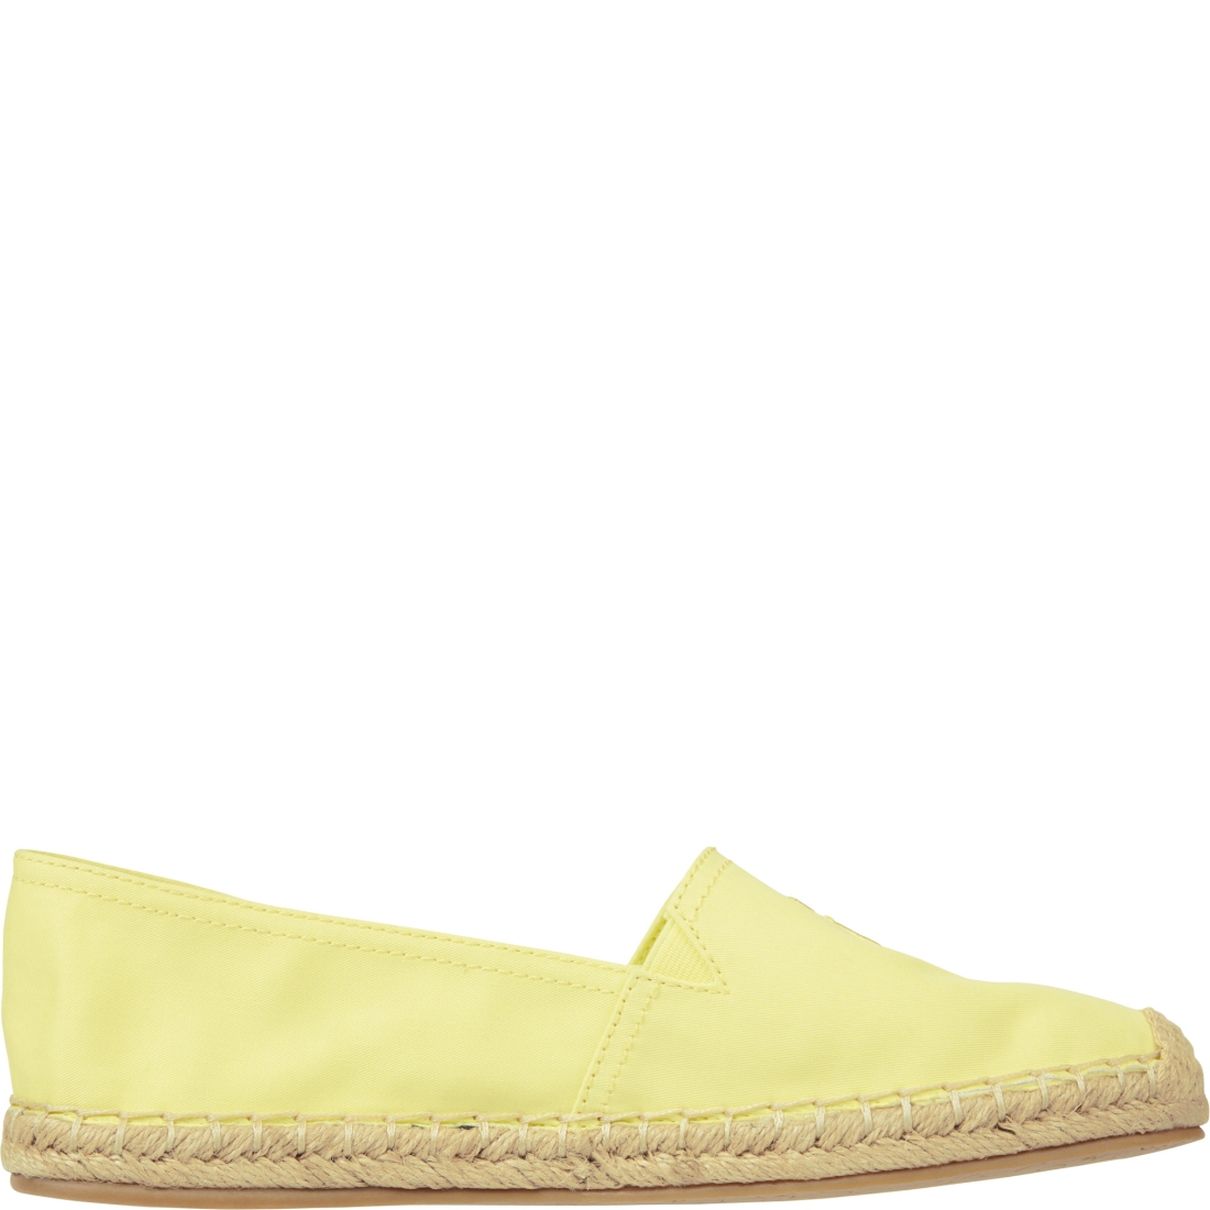 TOMMY HILFIGER loafer tipo bateliai moterims, Geltona, Embroidered flat espadrille